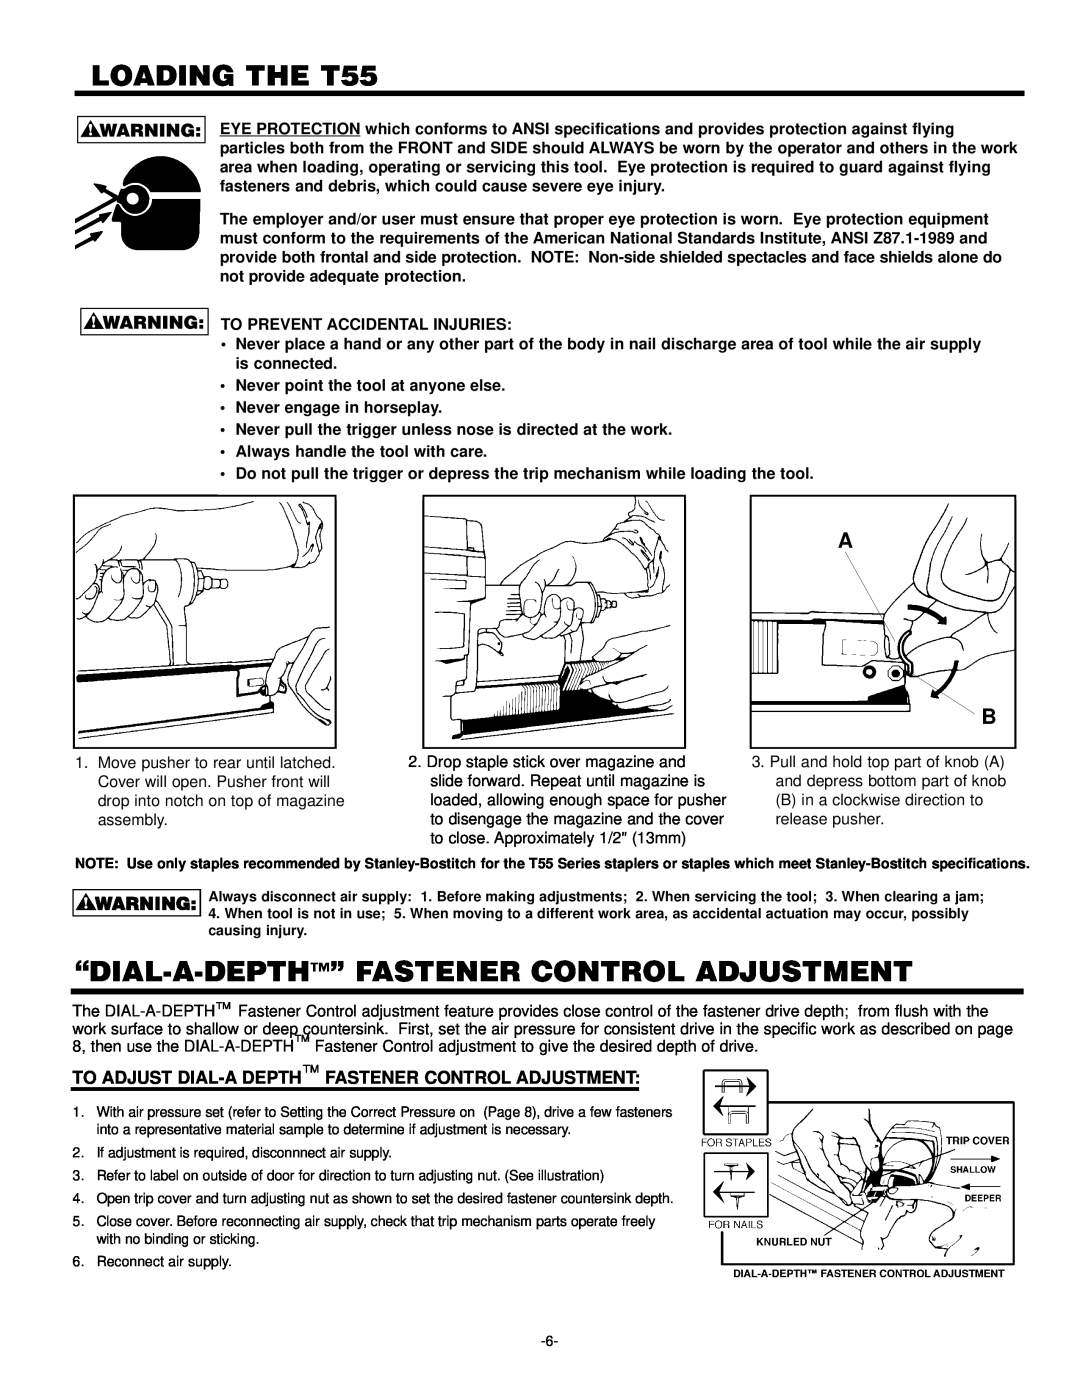 Bostitch manual LOADING THE T55, “Dial-A-Depth” Fastener Control Adjustment 